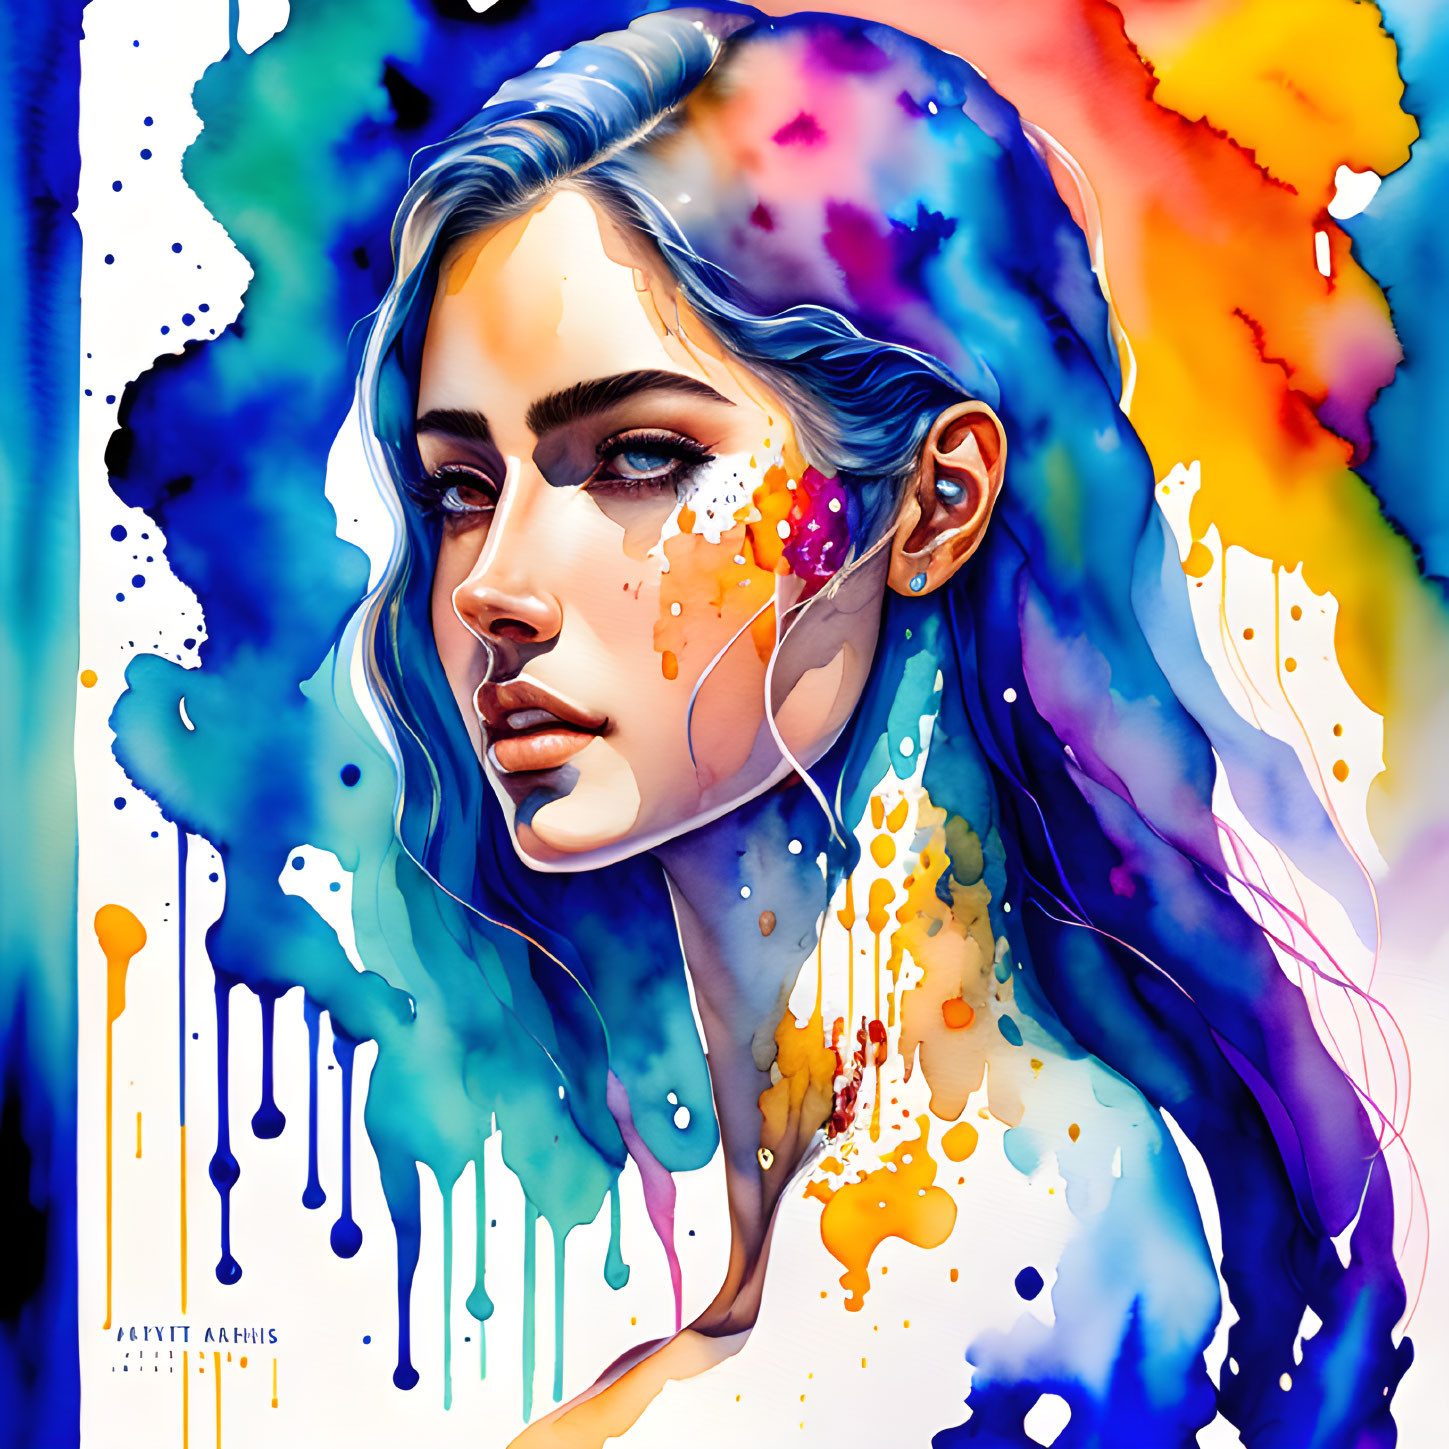 Colorful Watercolor Illustration of Woman with Abstract Splashes